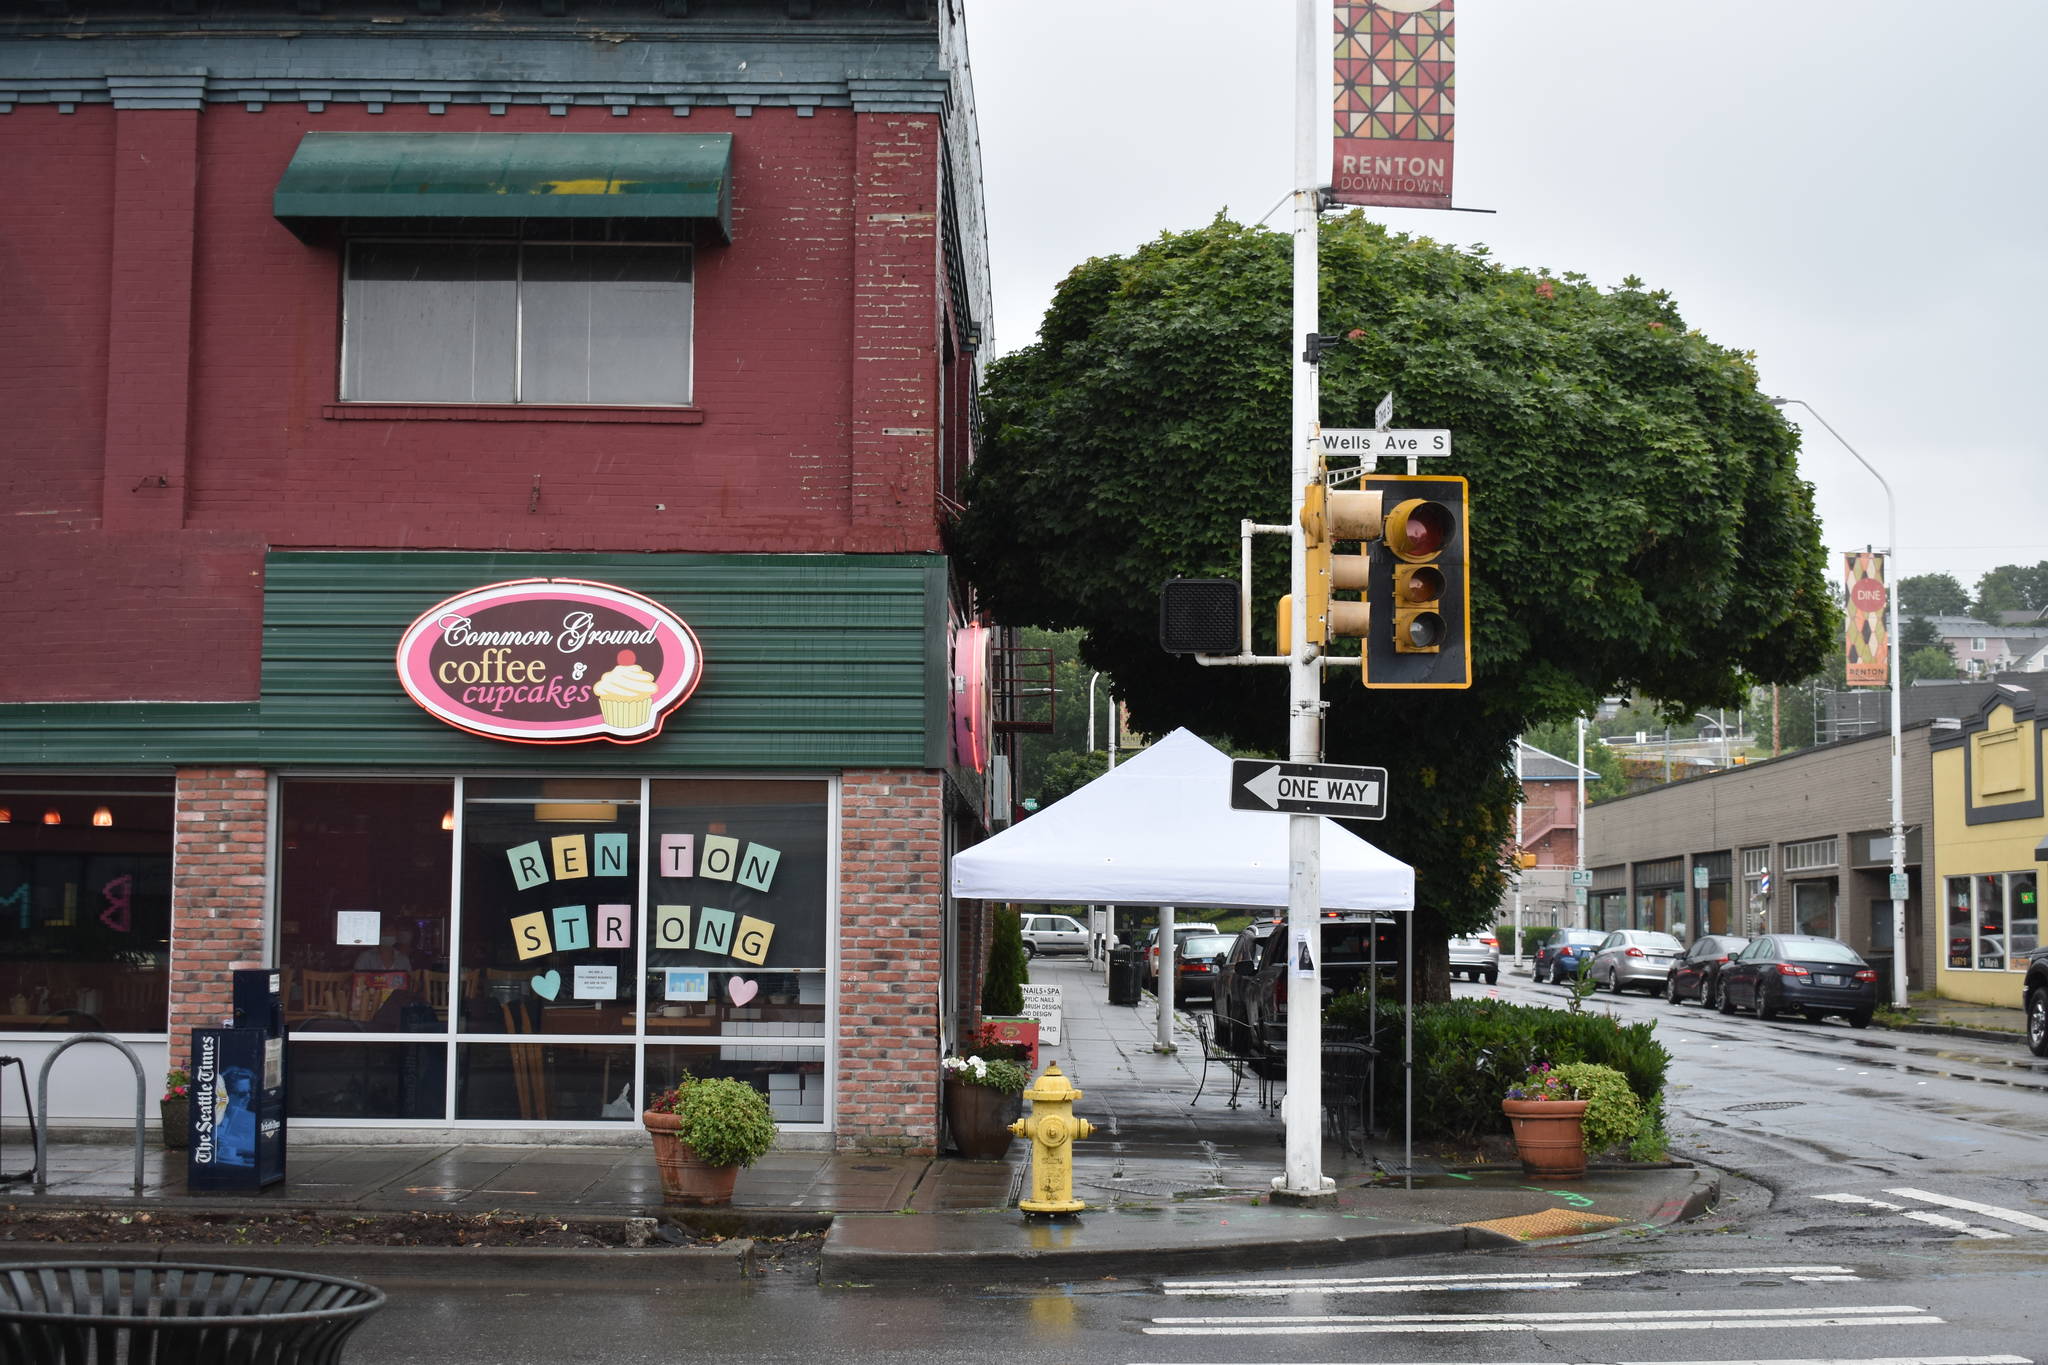 On Monday afternoon, the newer trees around Common Ground Coffee and Cupcakes were already removed but the at-least 13 year old Maple tree remained at an intersection that is being improved for the Wells and Williams two-way conversion project. Photo by Haley Ausbun.